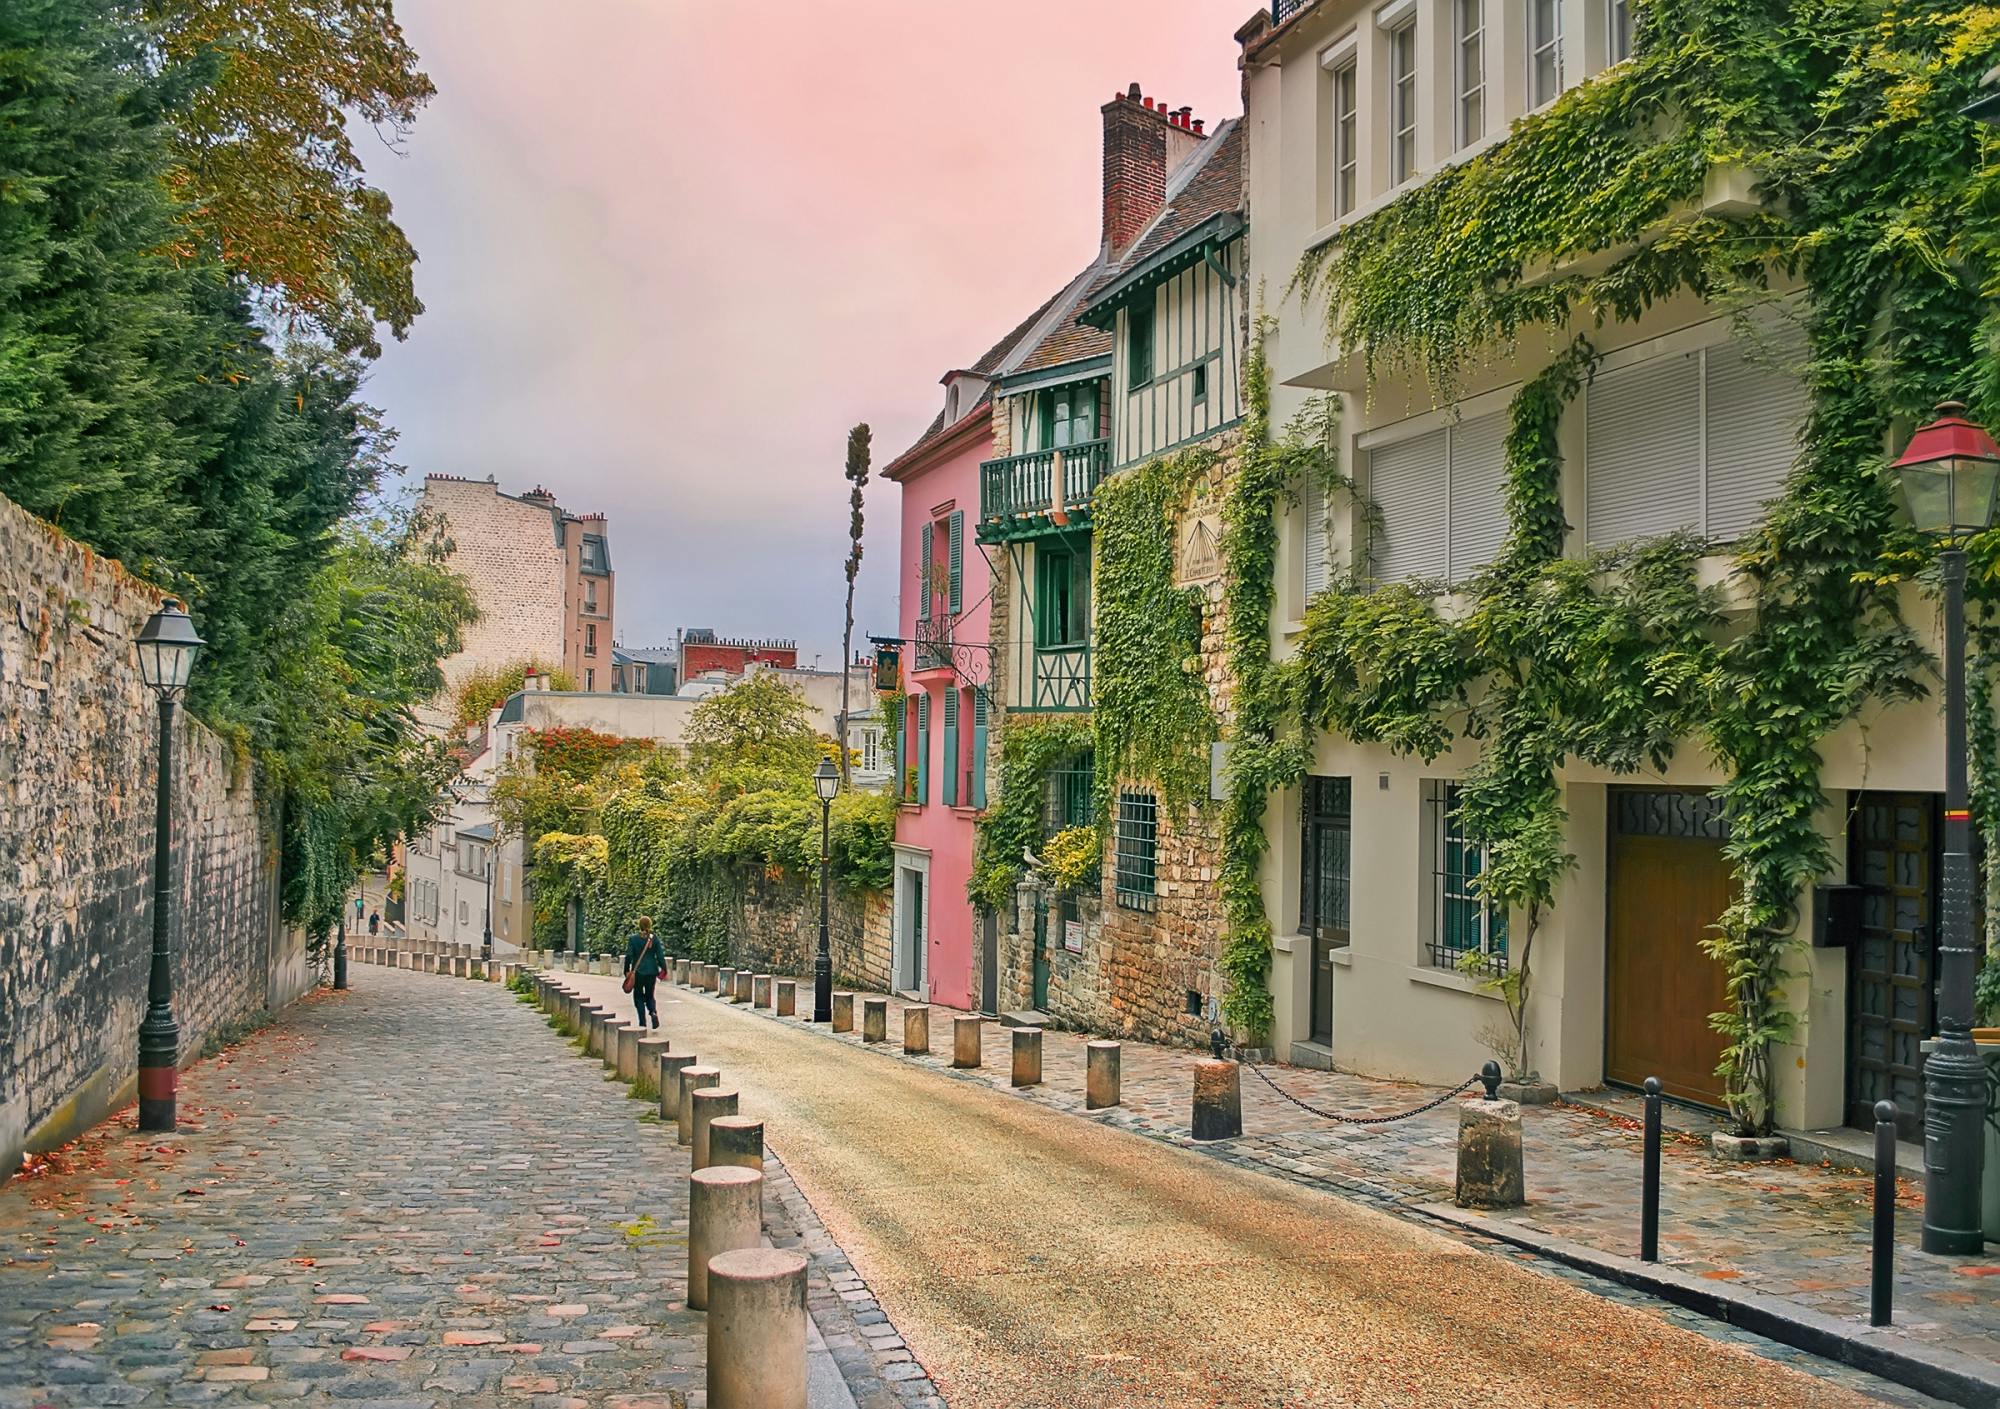 Romantic Montmartre: Lost Lovers exploration game and self-guided tour